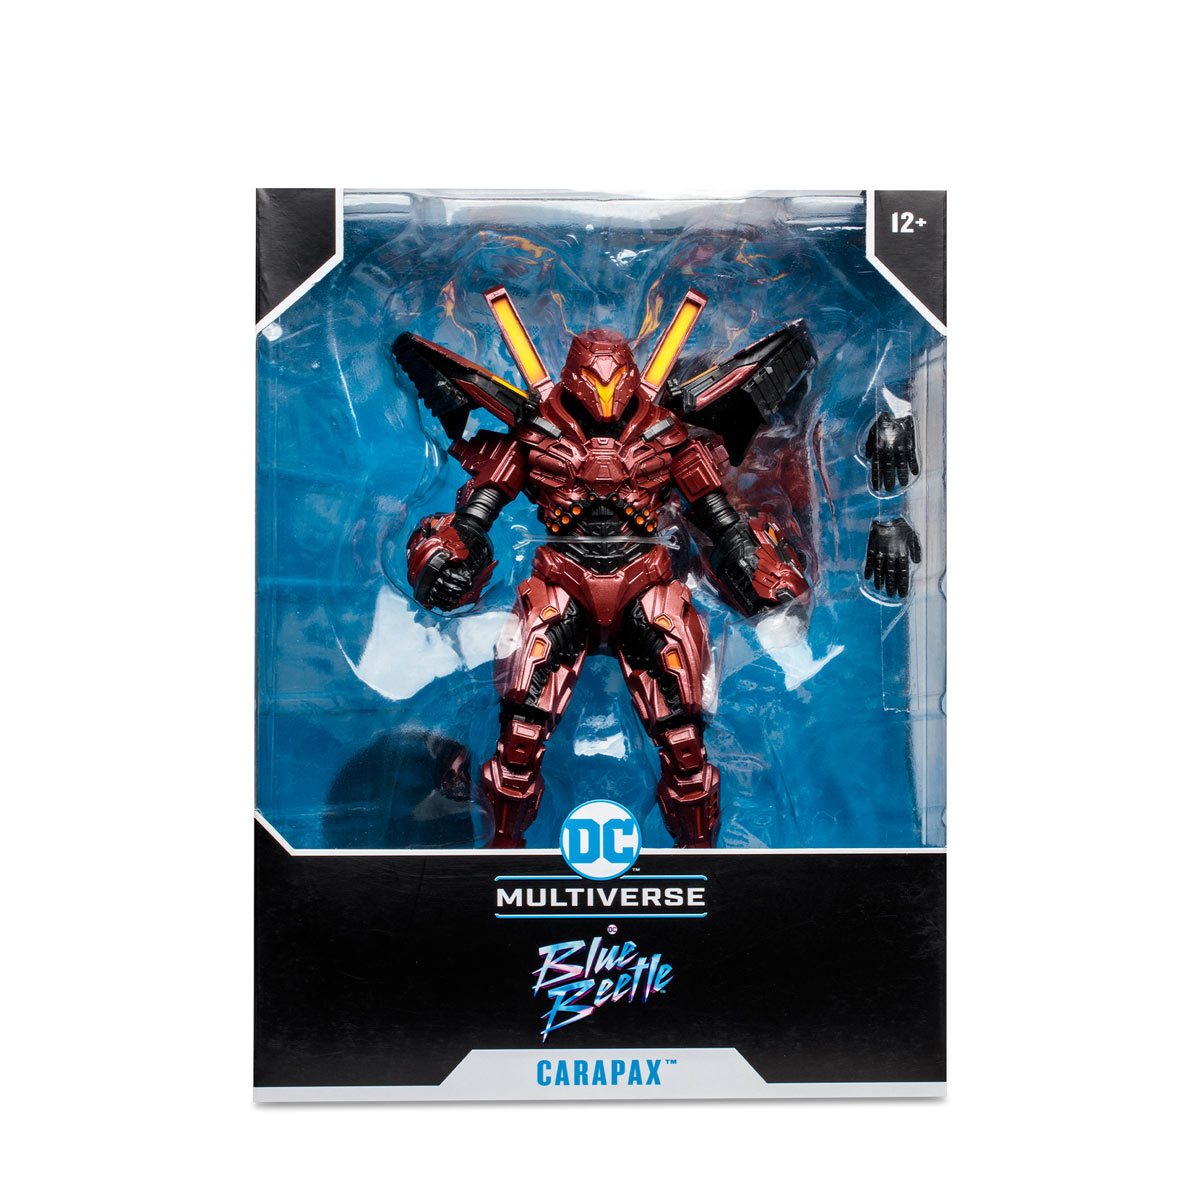 DC Blue Beetle Movie Carapax Megafig Action Figure Toy in a packaging box front view - Heretoserveyou